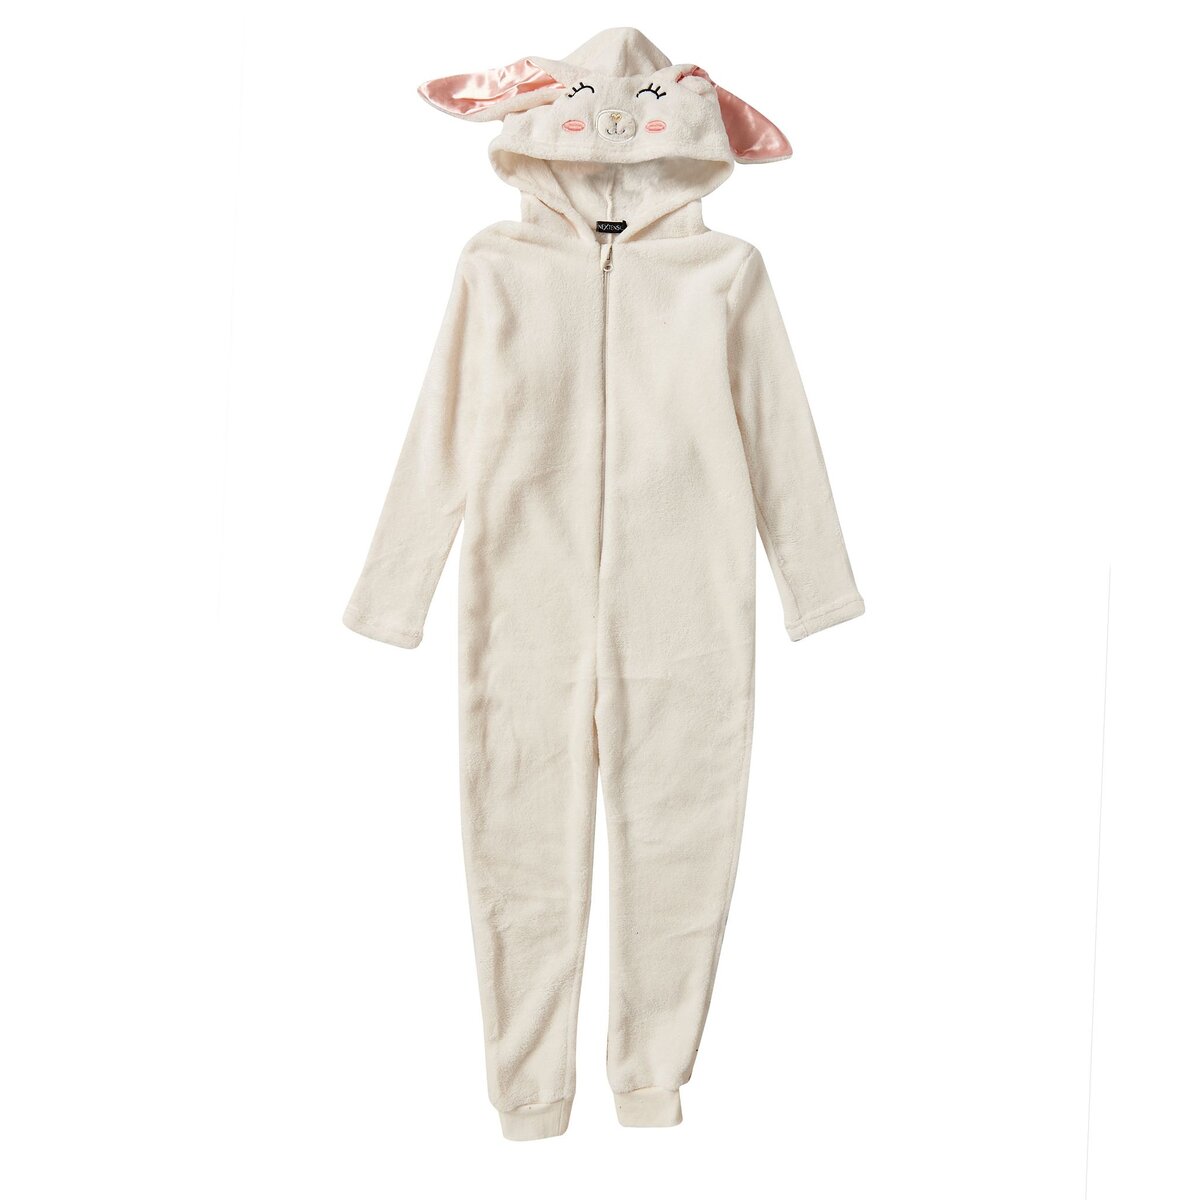 IN EXTENSO Combinaison peluche lapin fille 